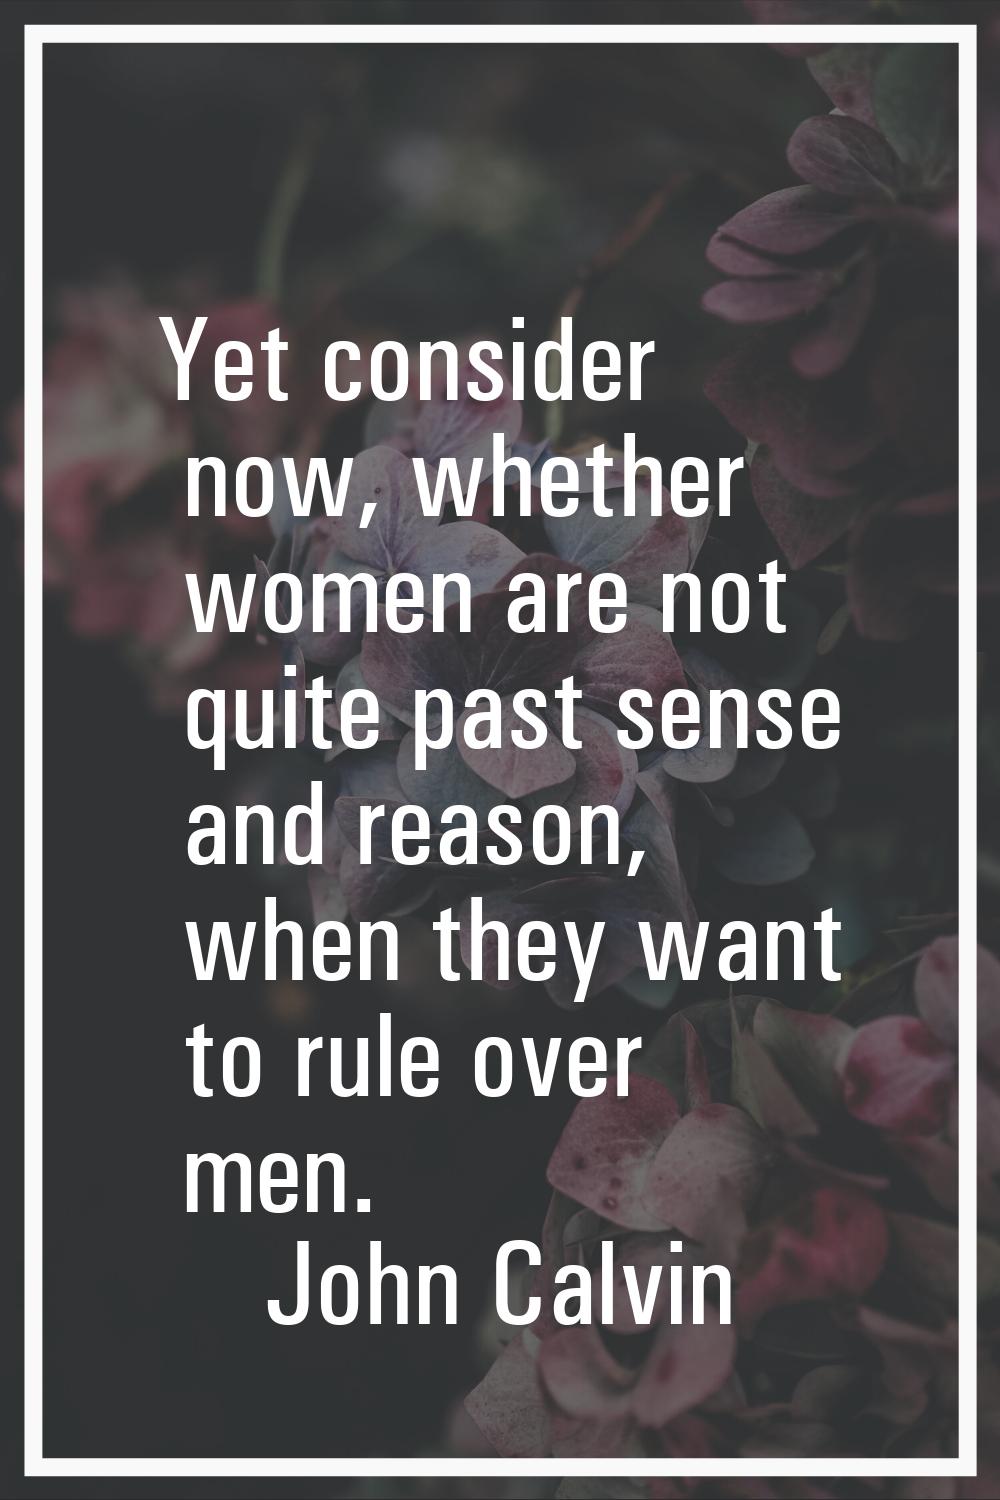 Yet consider now, whether women are not quite past sense and reason, when they want to rule over me